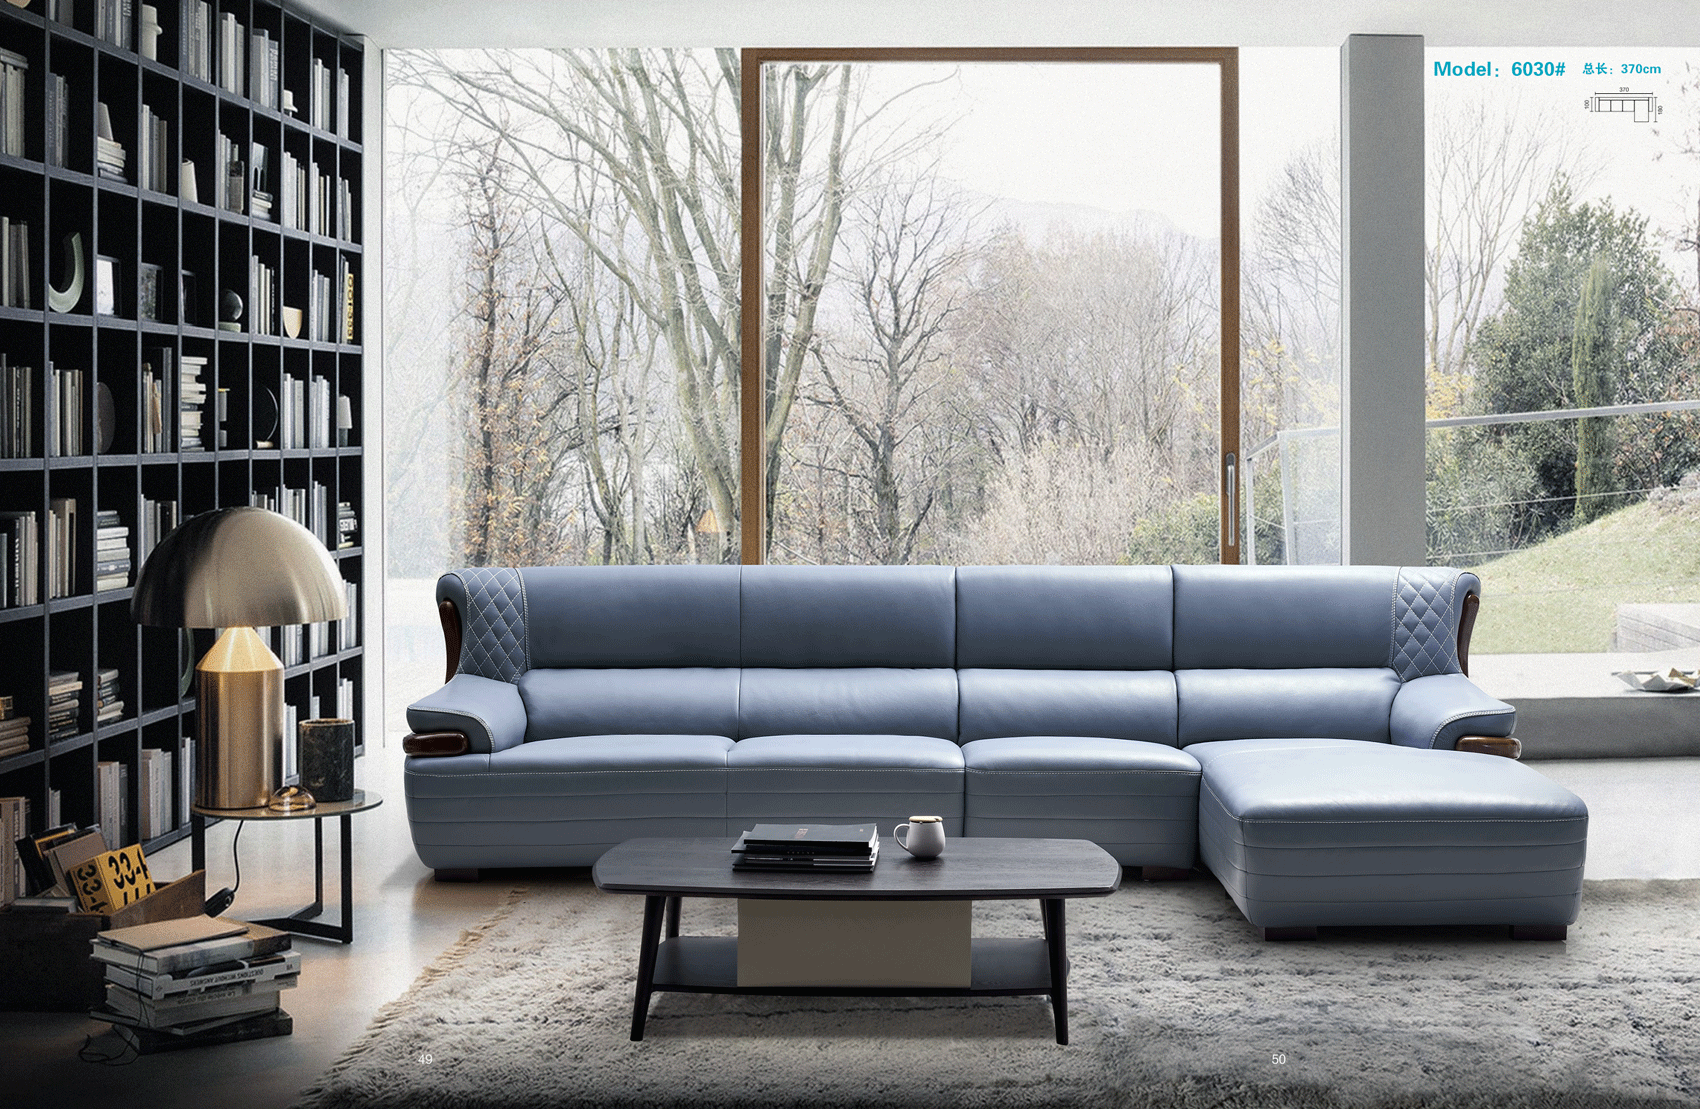 Brands Status Modern Collections, Italy 6030 Sectional